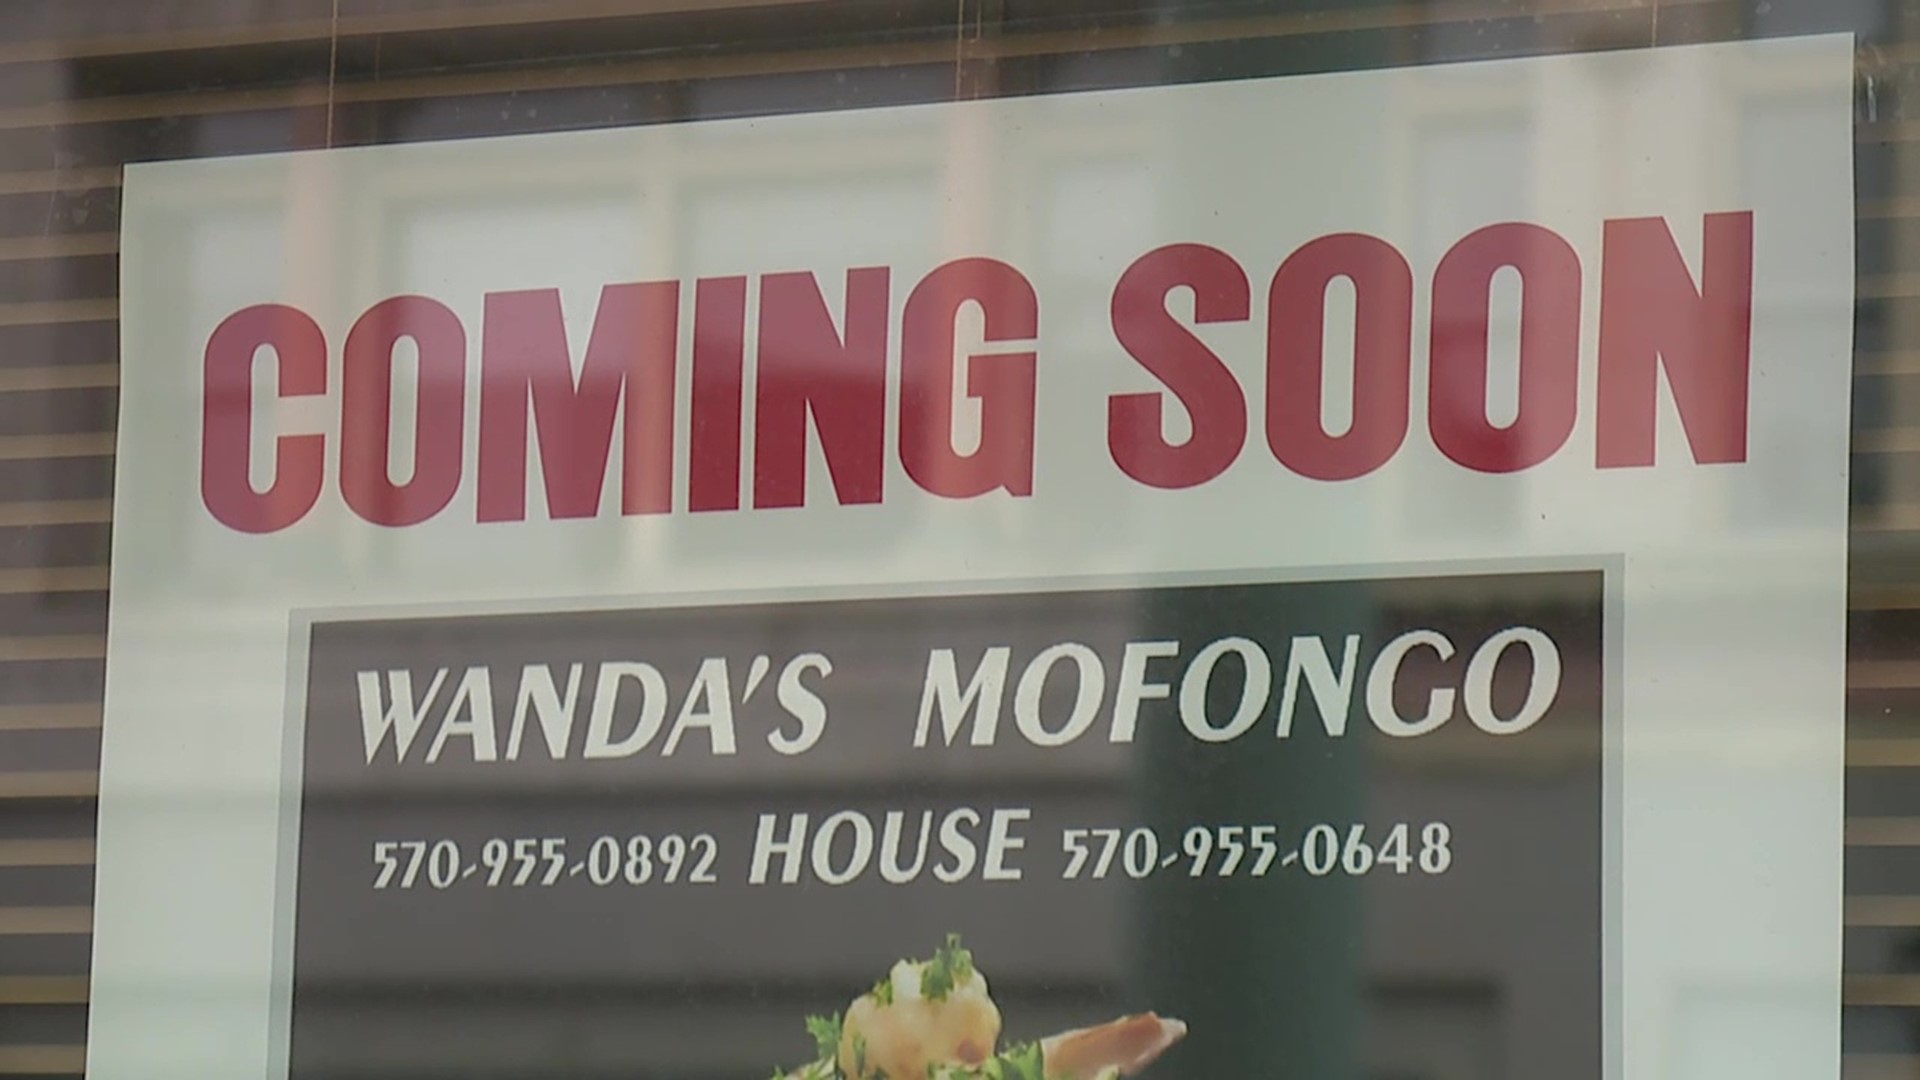 Many restaurants in our area have been forced to close during the pandemic, but one spot in Scranton is doing so well that the owner plans to open a new location.